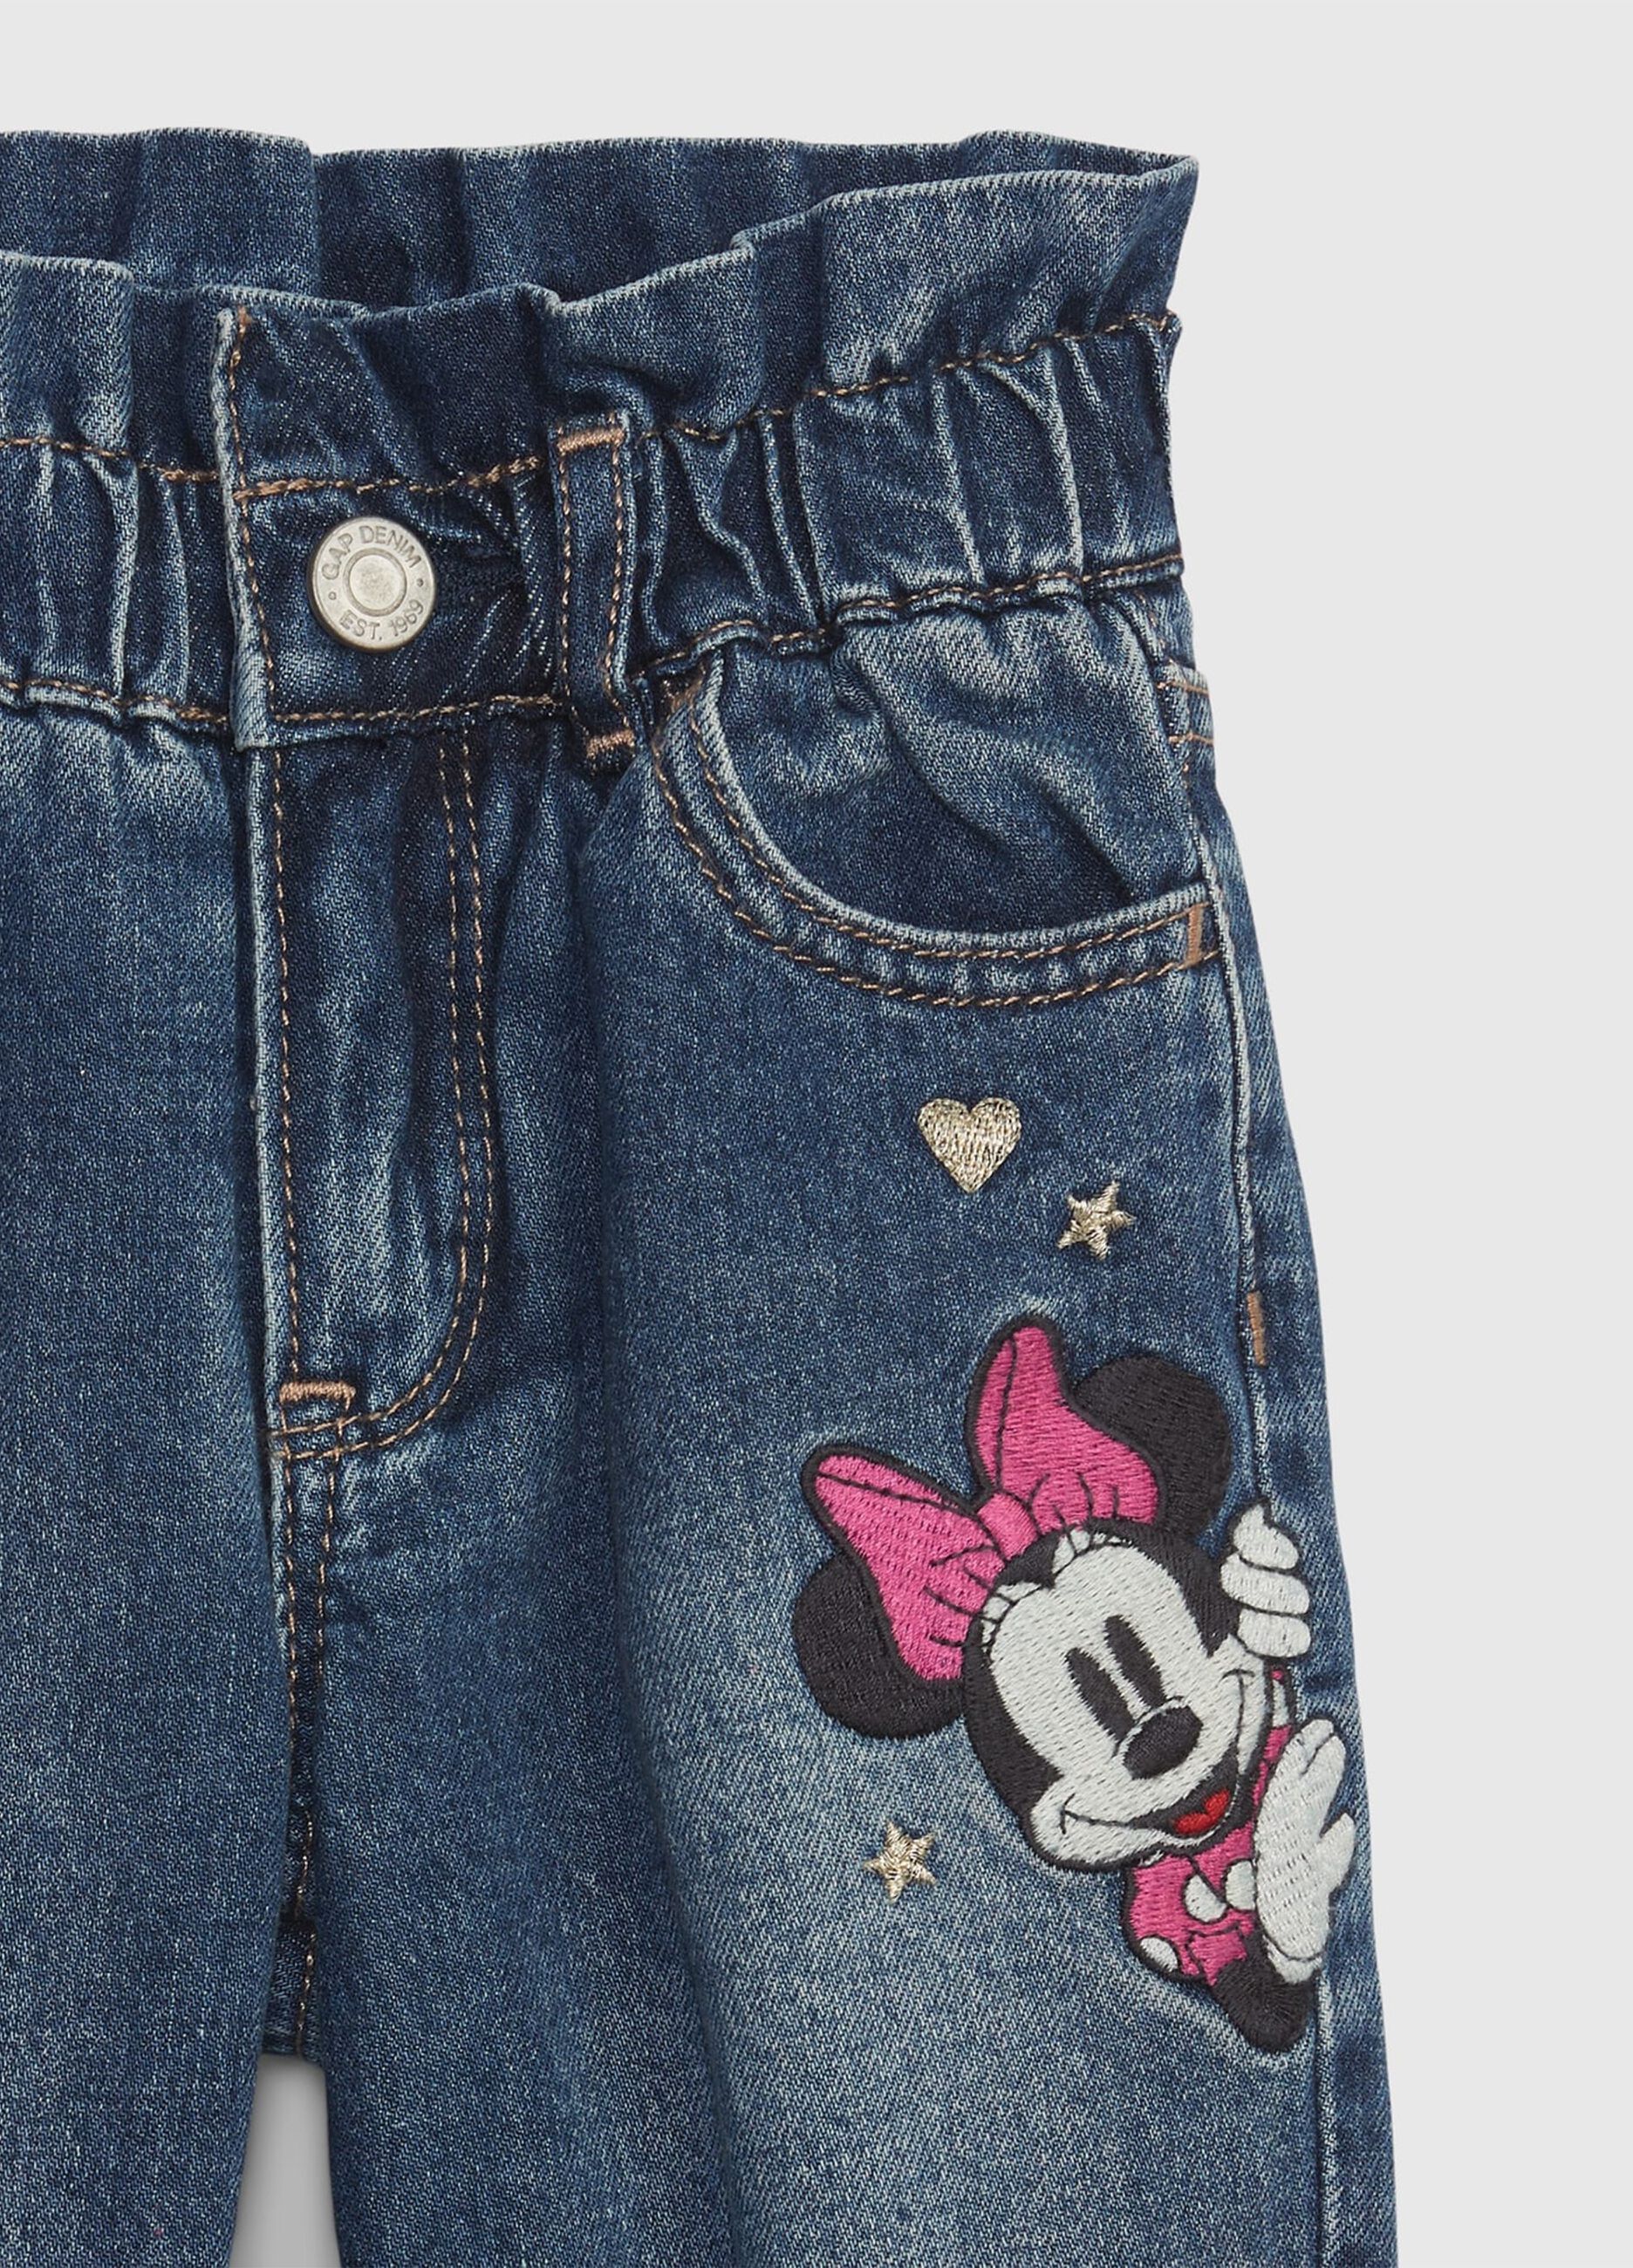 Mum-fit jeans with Disney Minnie Mouse patch_2